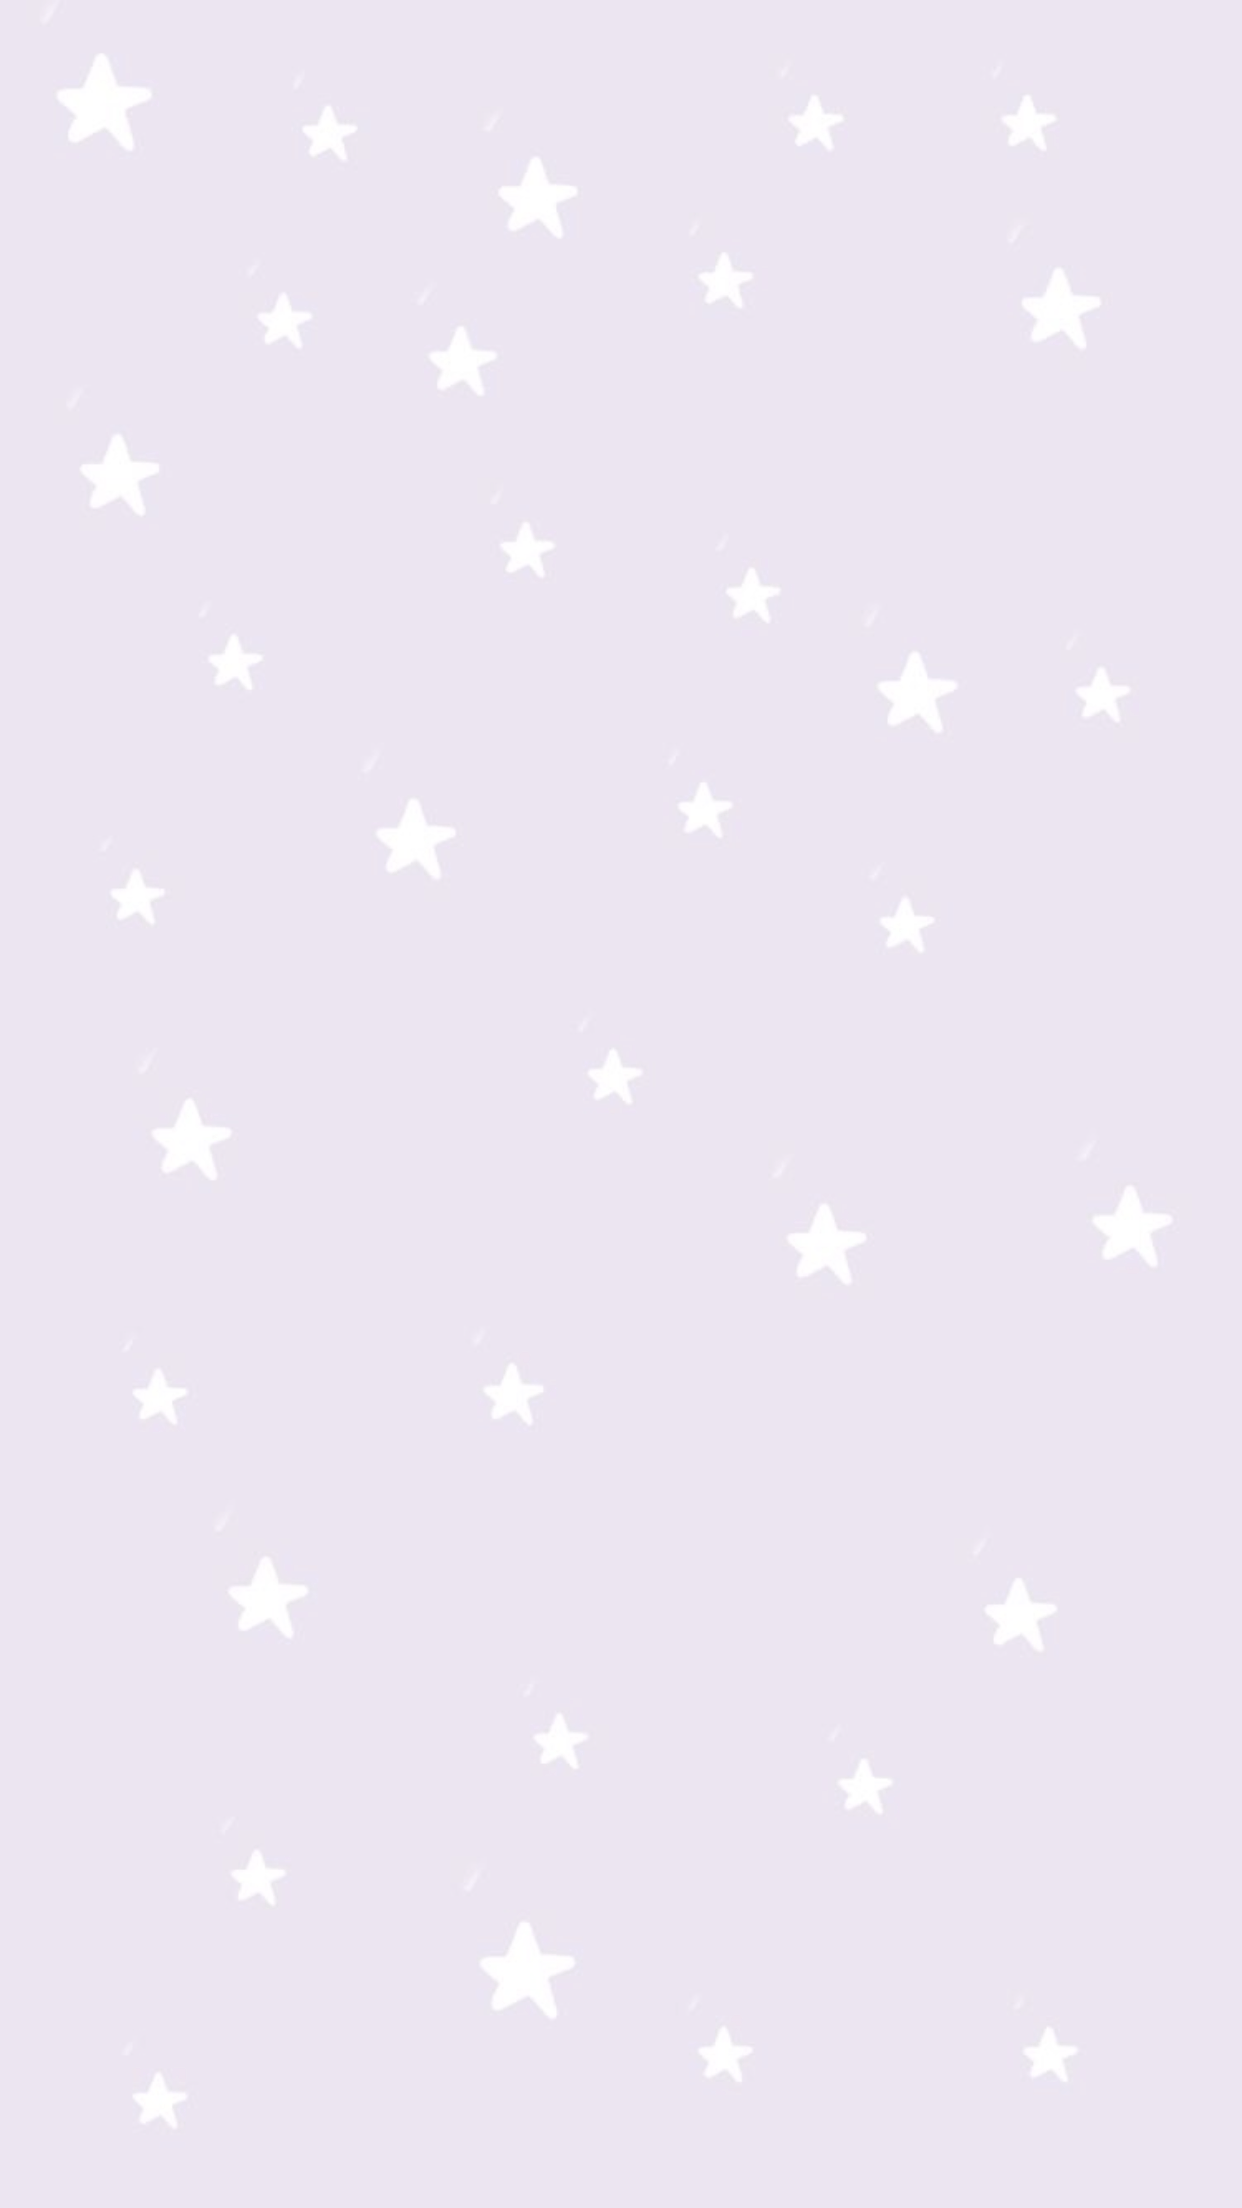 Pastel Stars Wallpapers - Top Free Pastel Stars Backgrounds ...